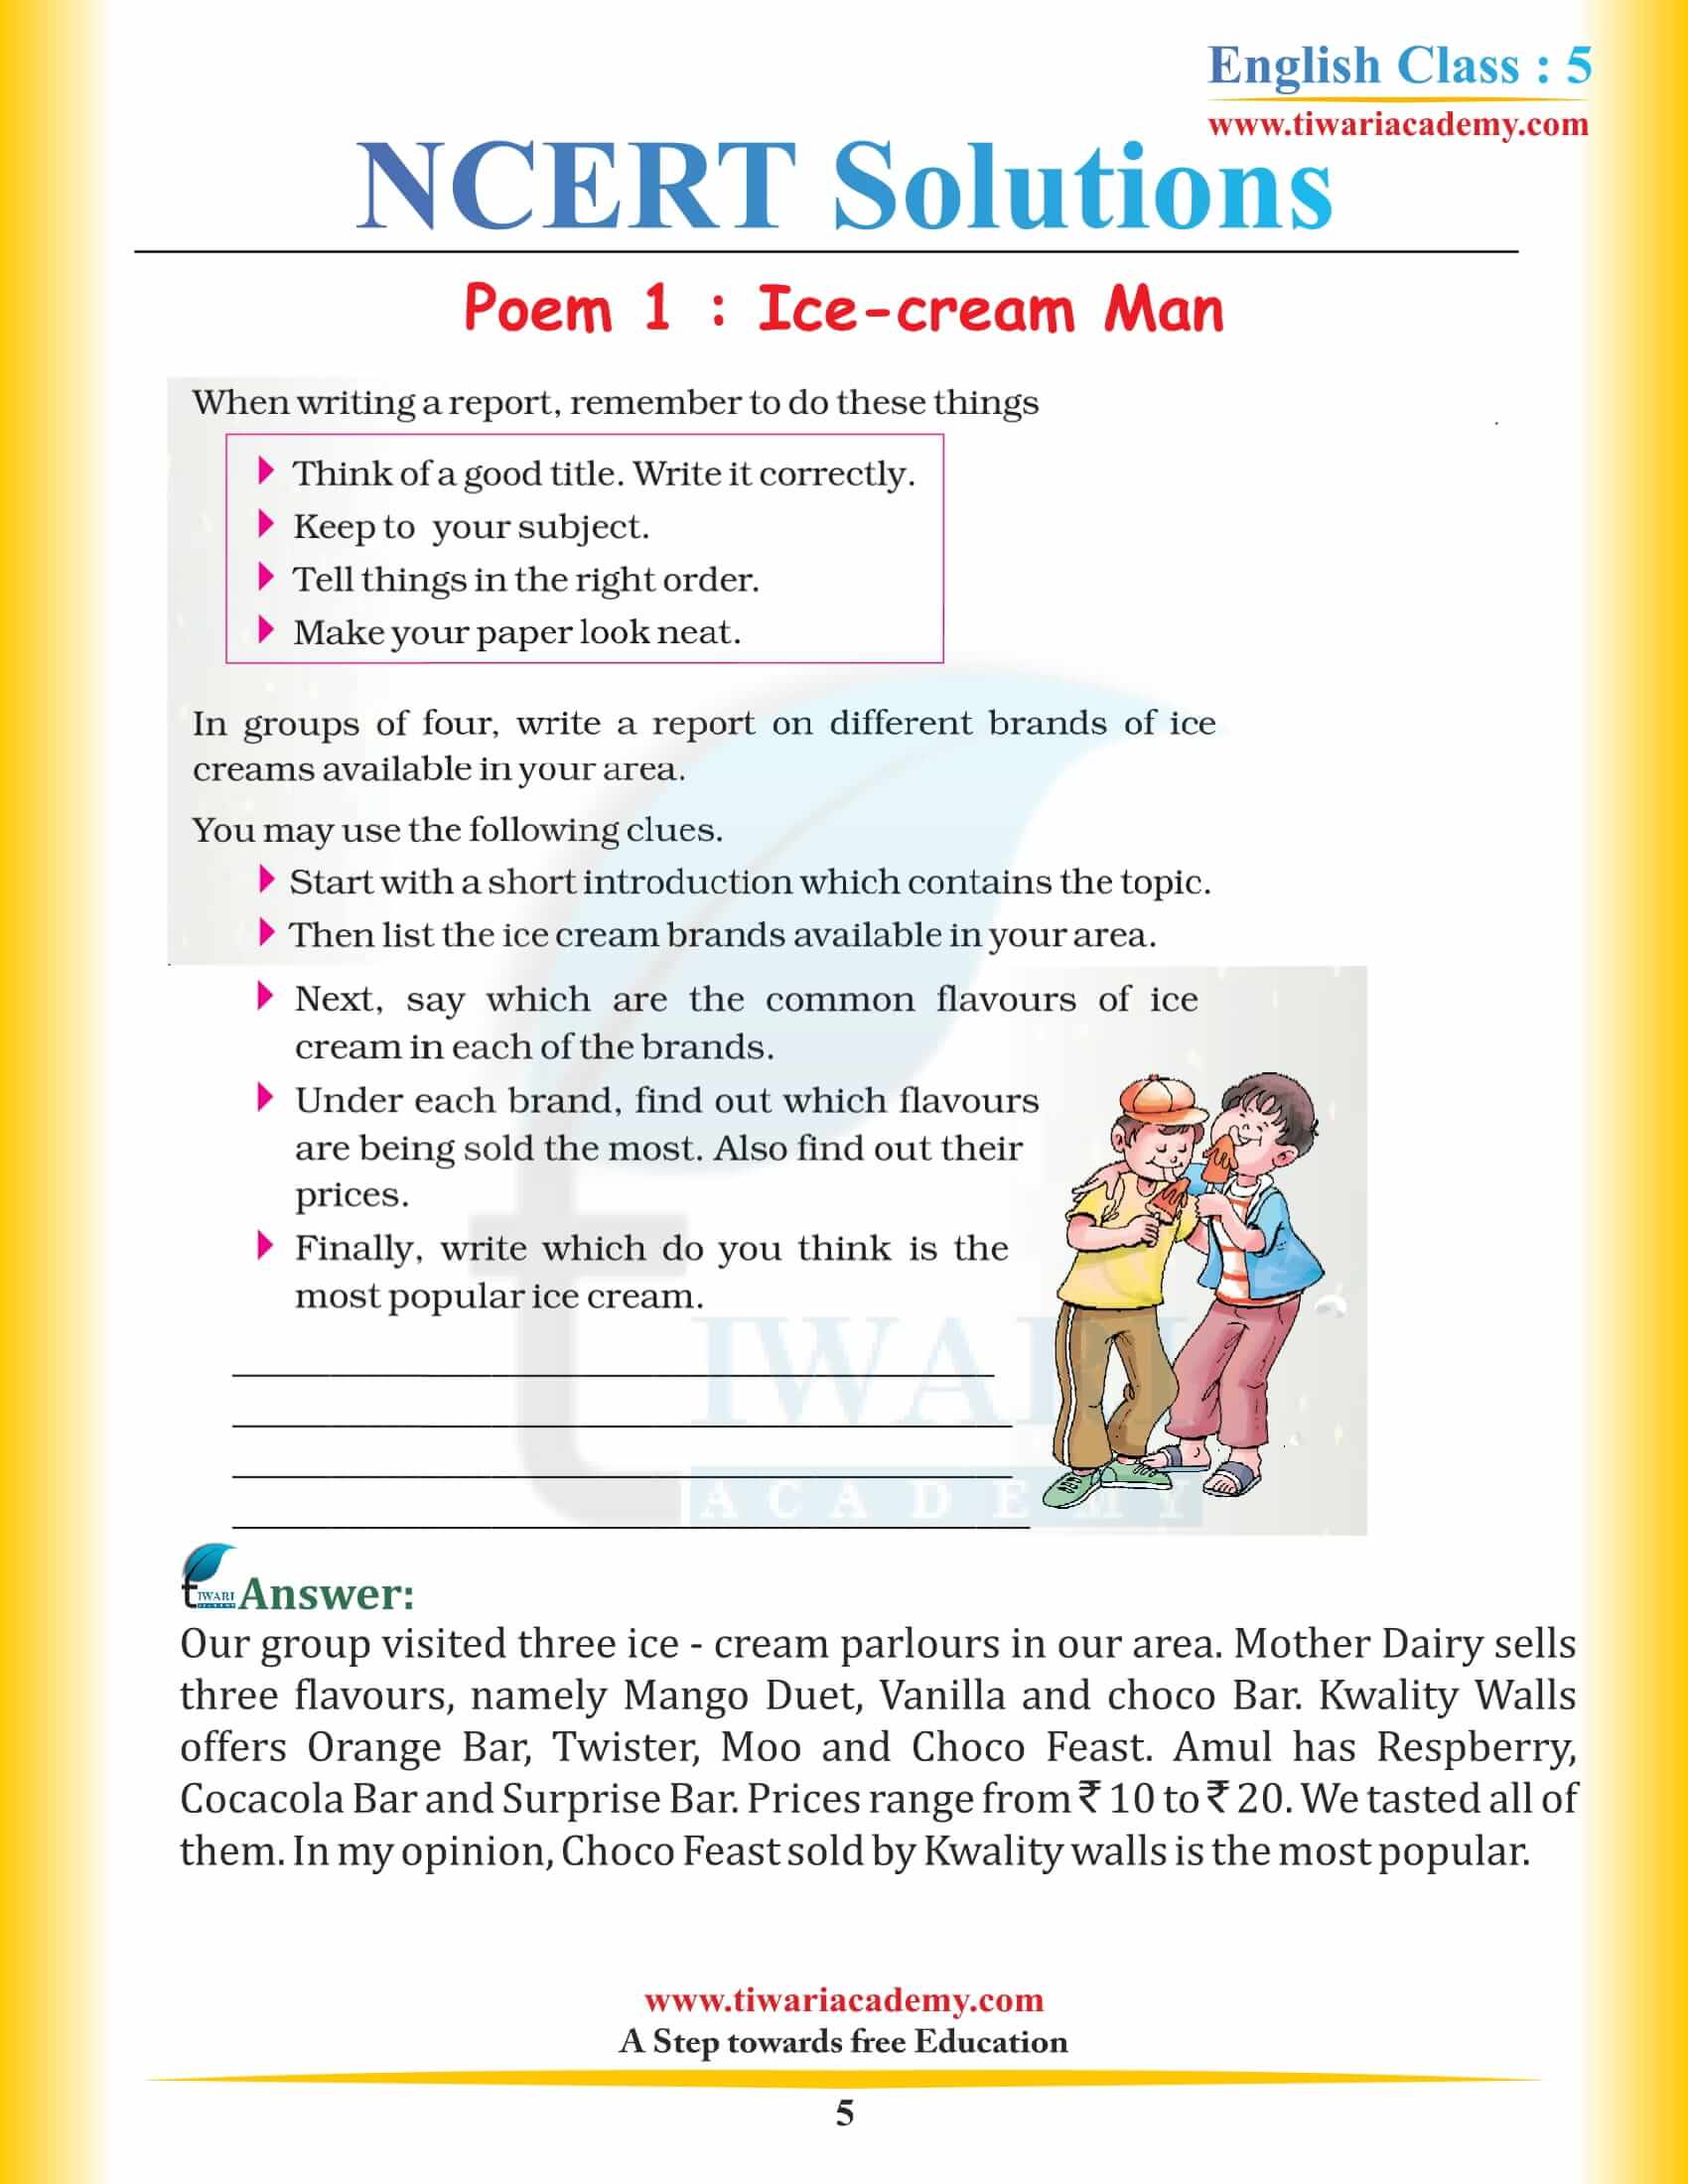 NCERT Solutions for Class 5 English Chapter 1 Ice-cream Man in PDF